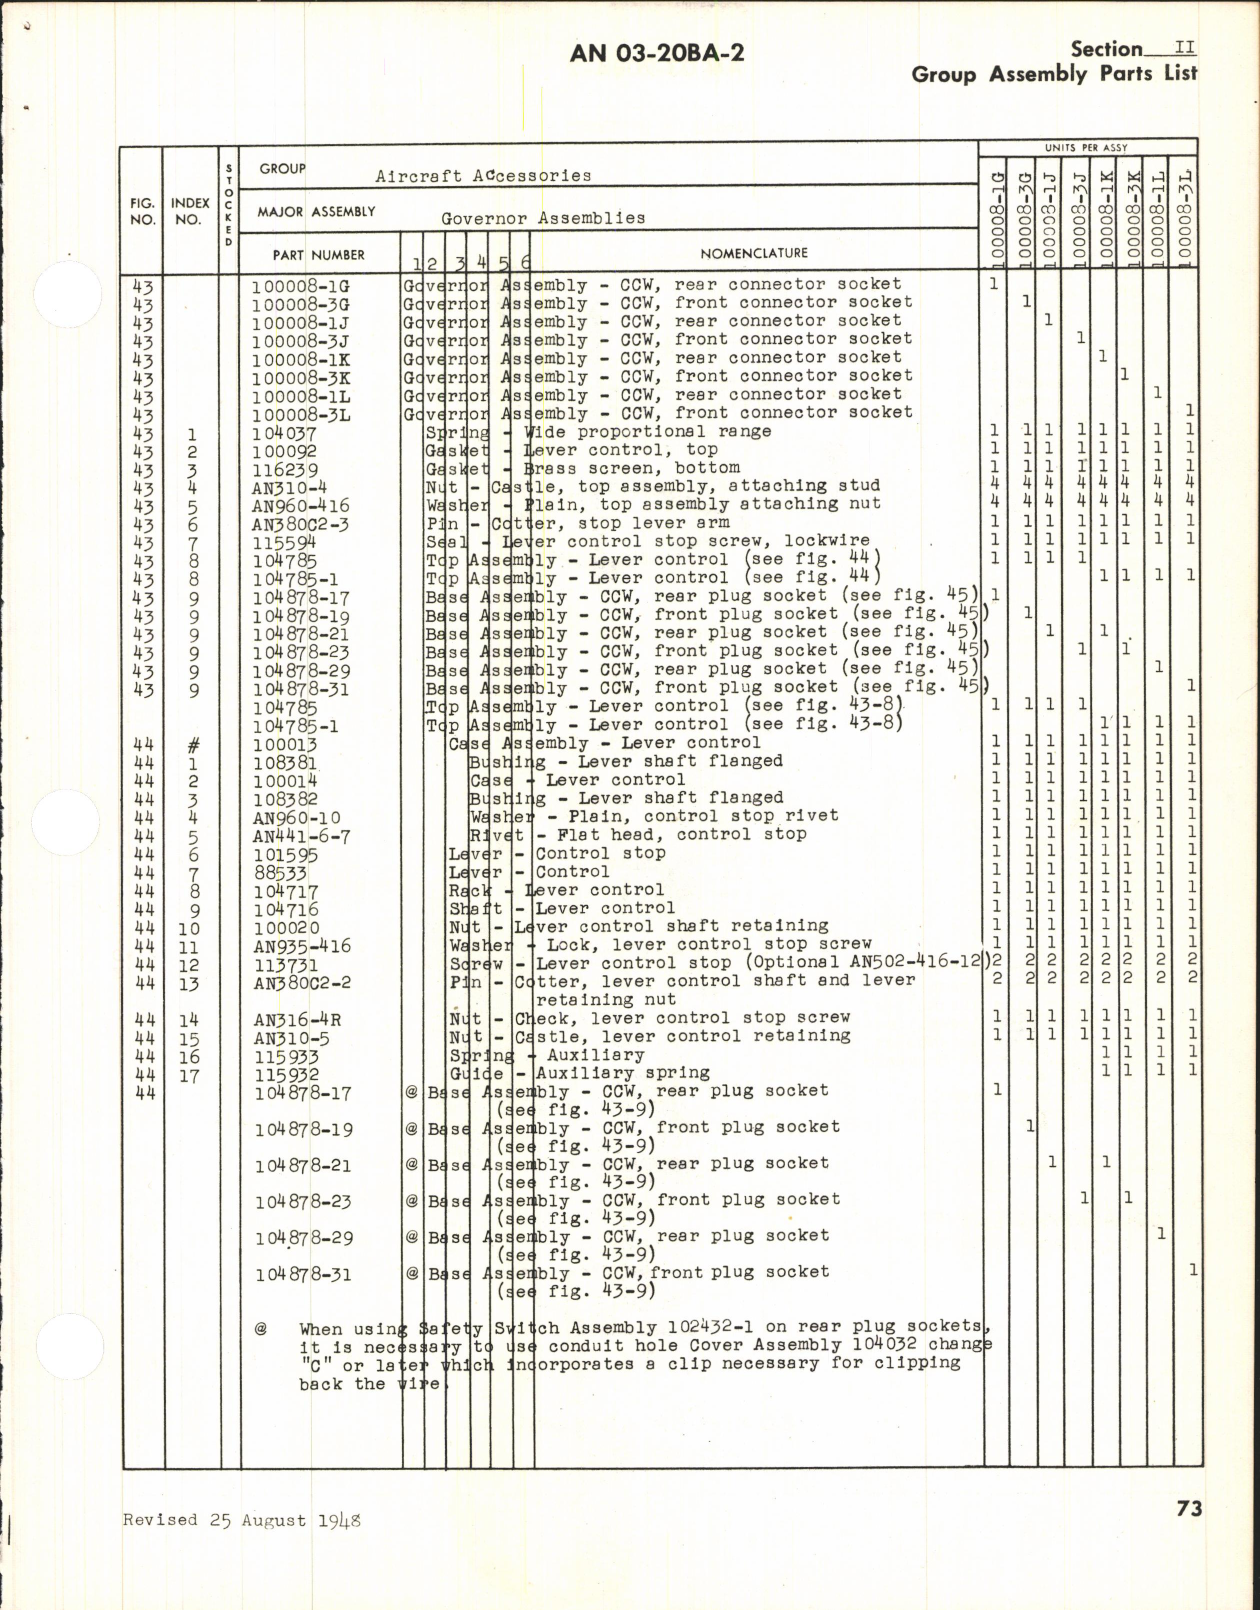 Sample page 5 from AirCorps Library document: Parts Catalog for Electric Propeller Governor and Propeller Controls